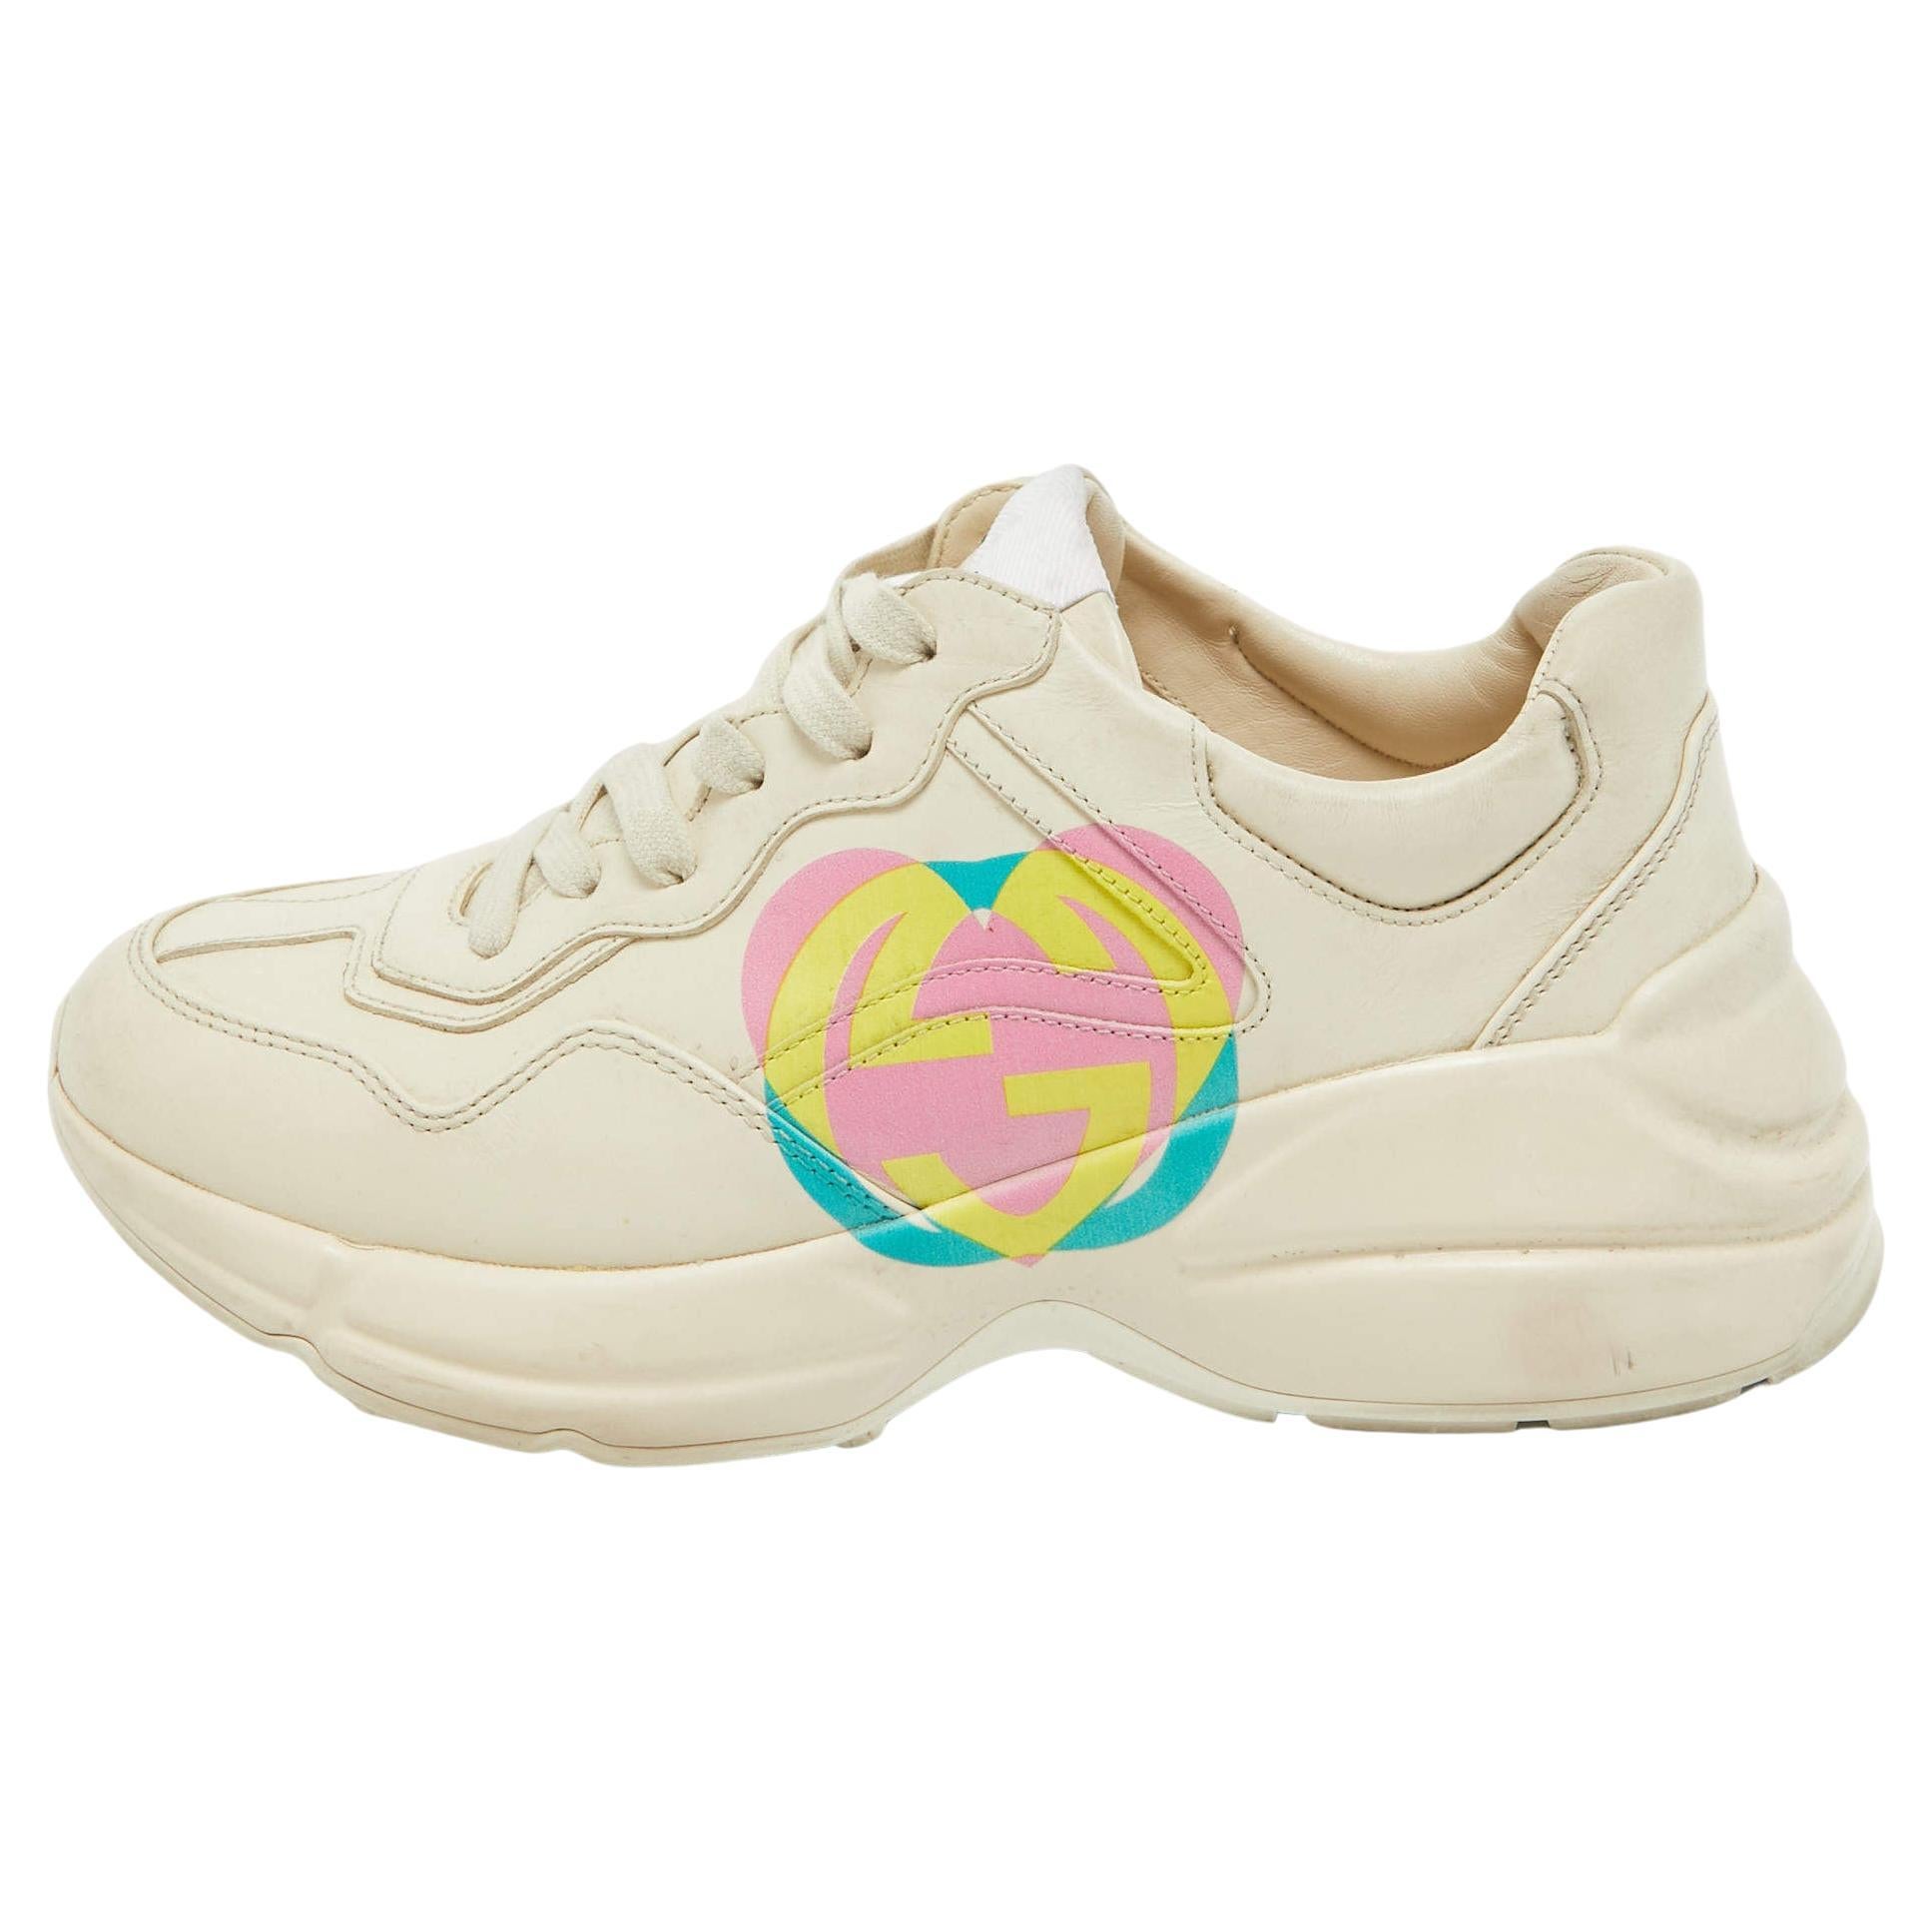 Gucci Cream Leather GG Heart Rhyton Sneakers Size 38